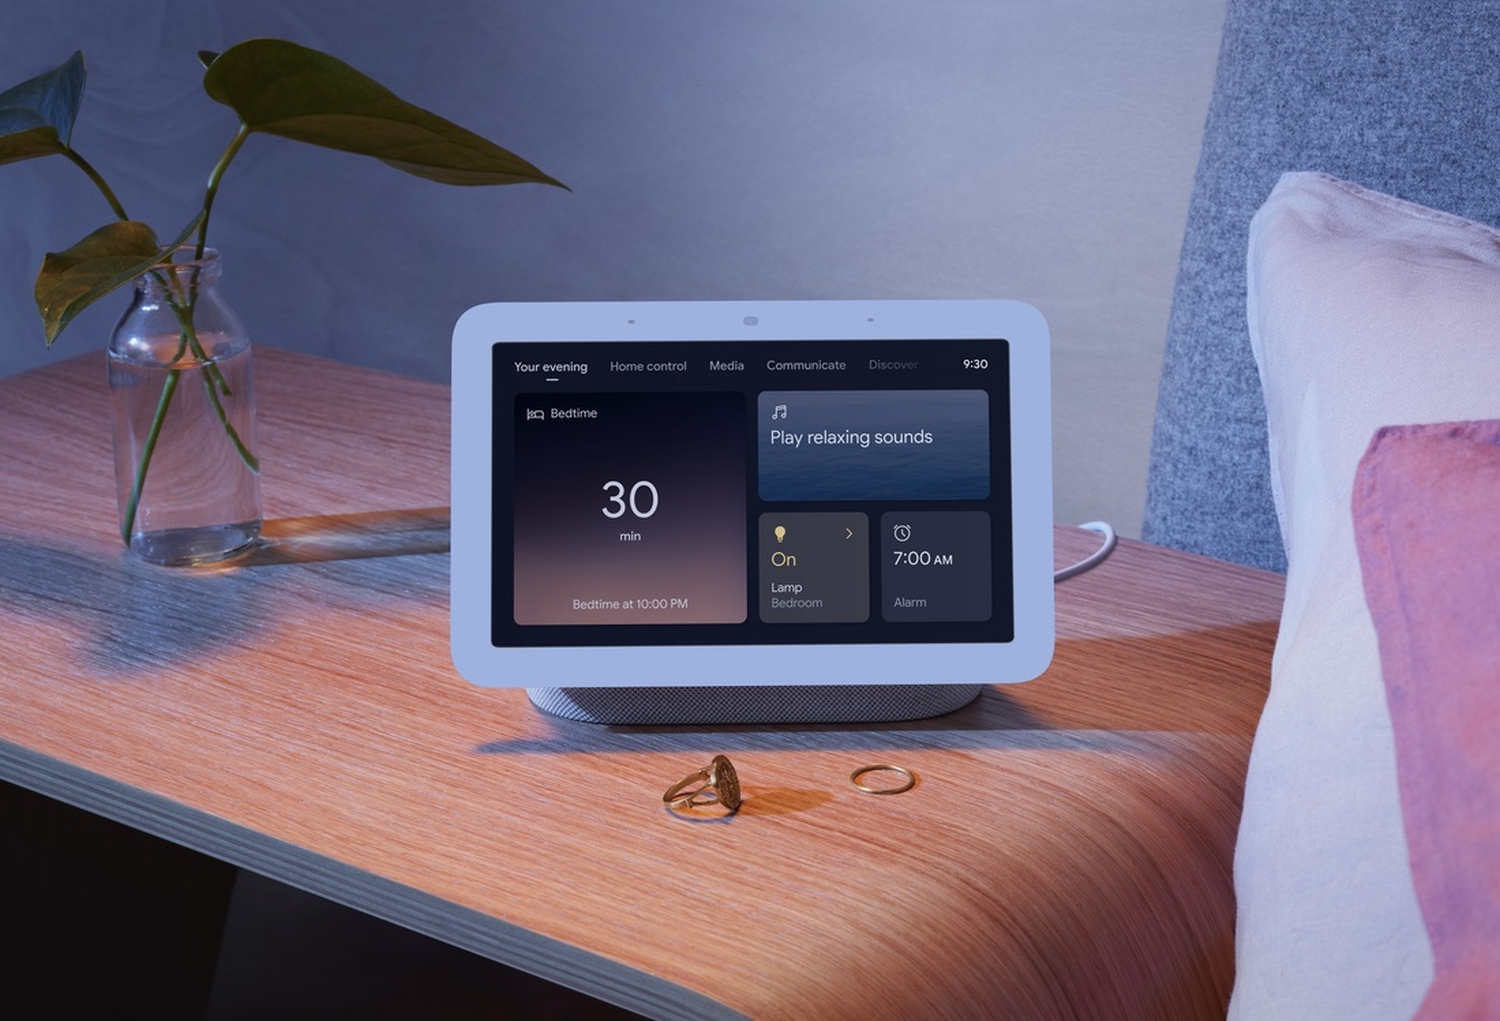 7 Things You Didn't Know Your Google Nest Hub Could Do